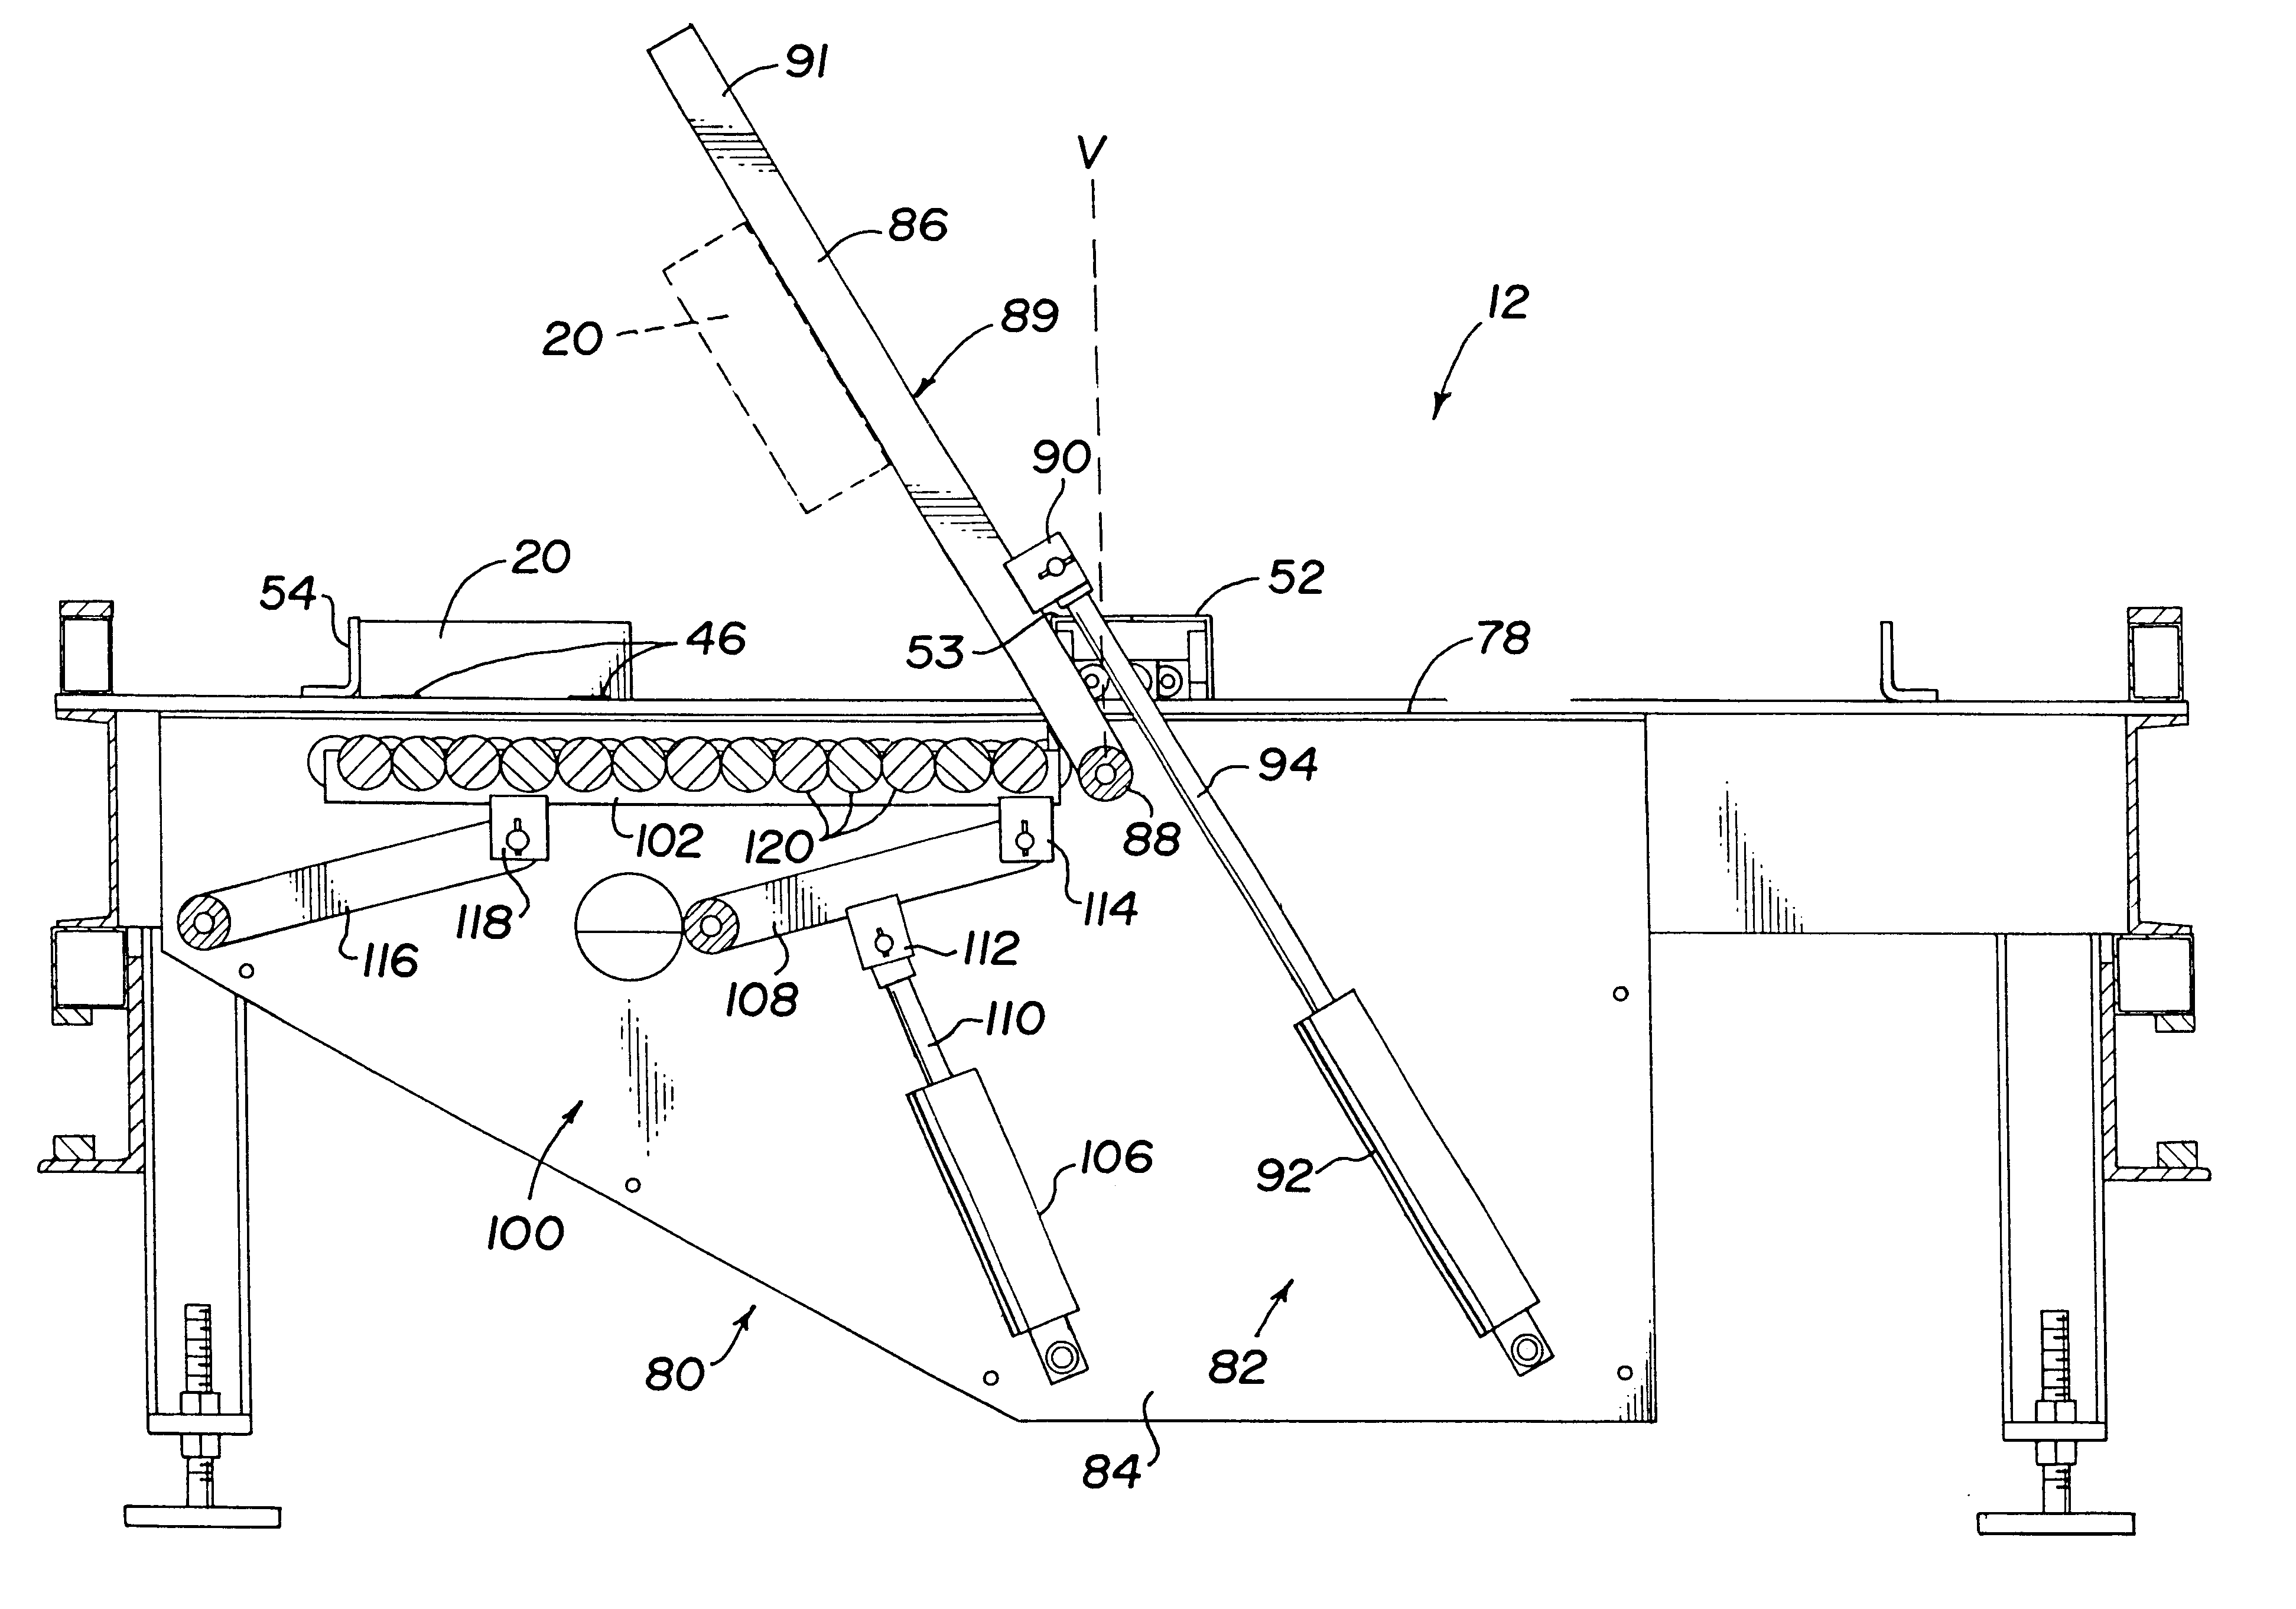 Truss table apparatus with automatic truss movement assembly and method